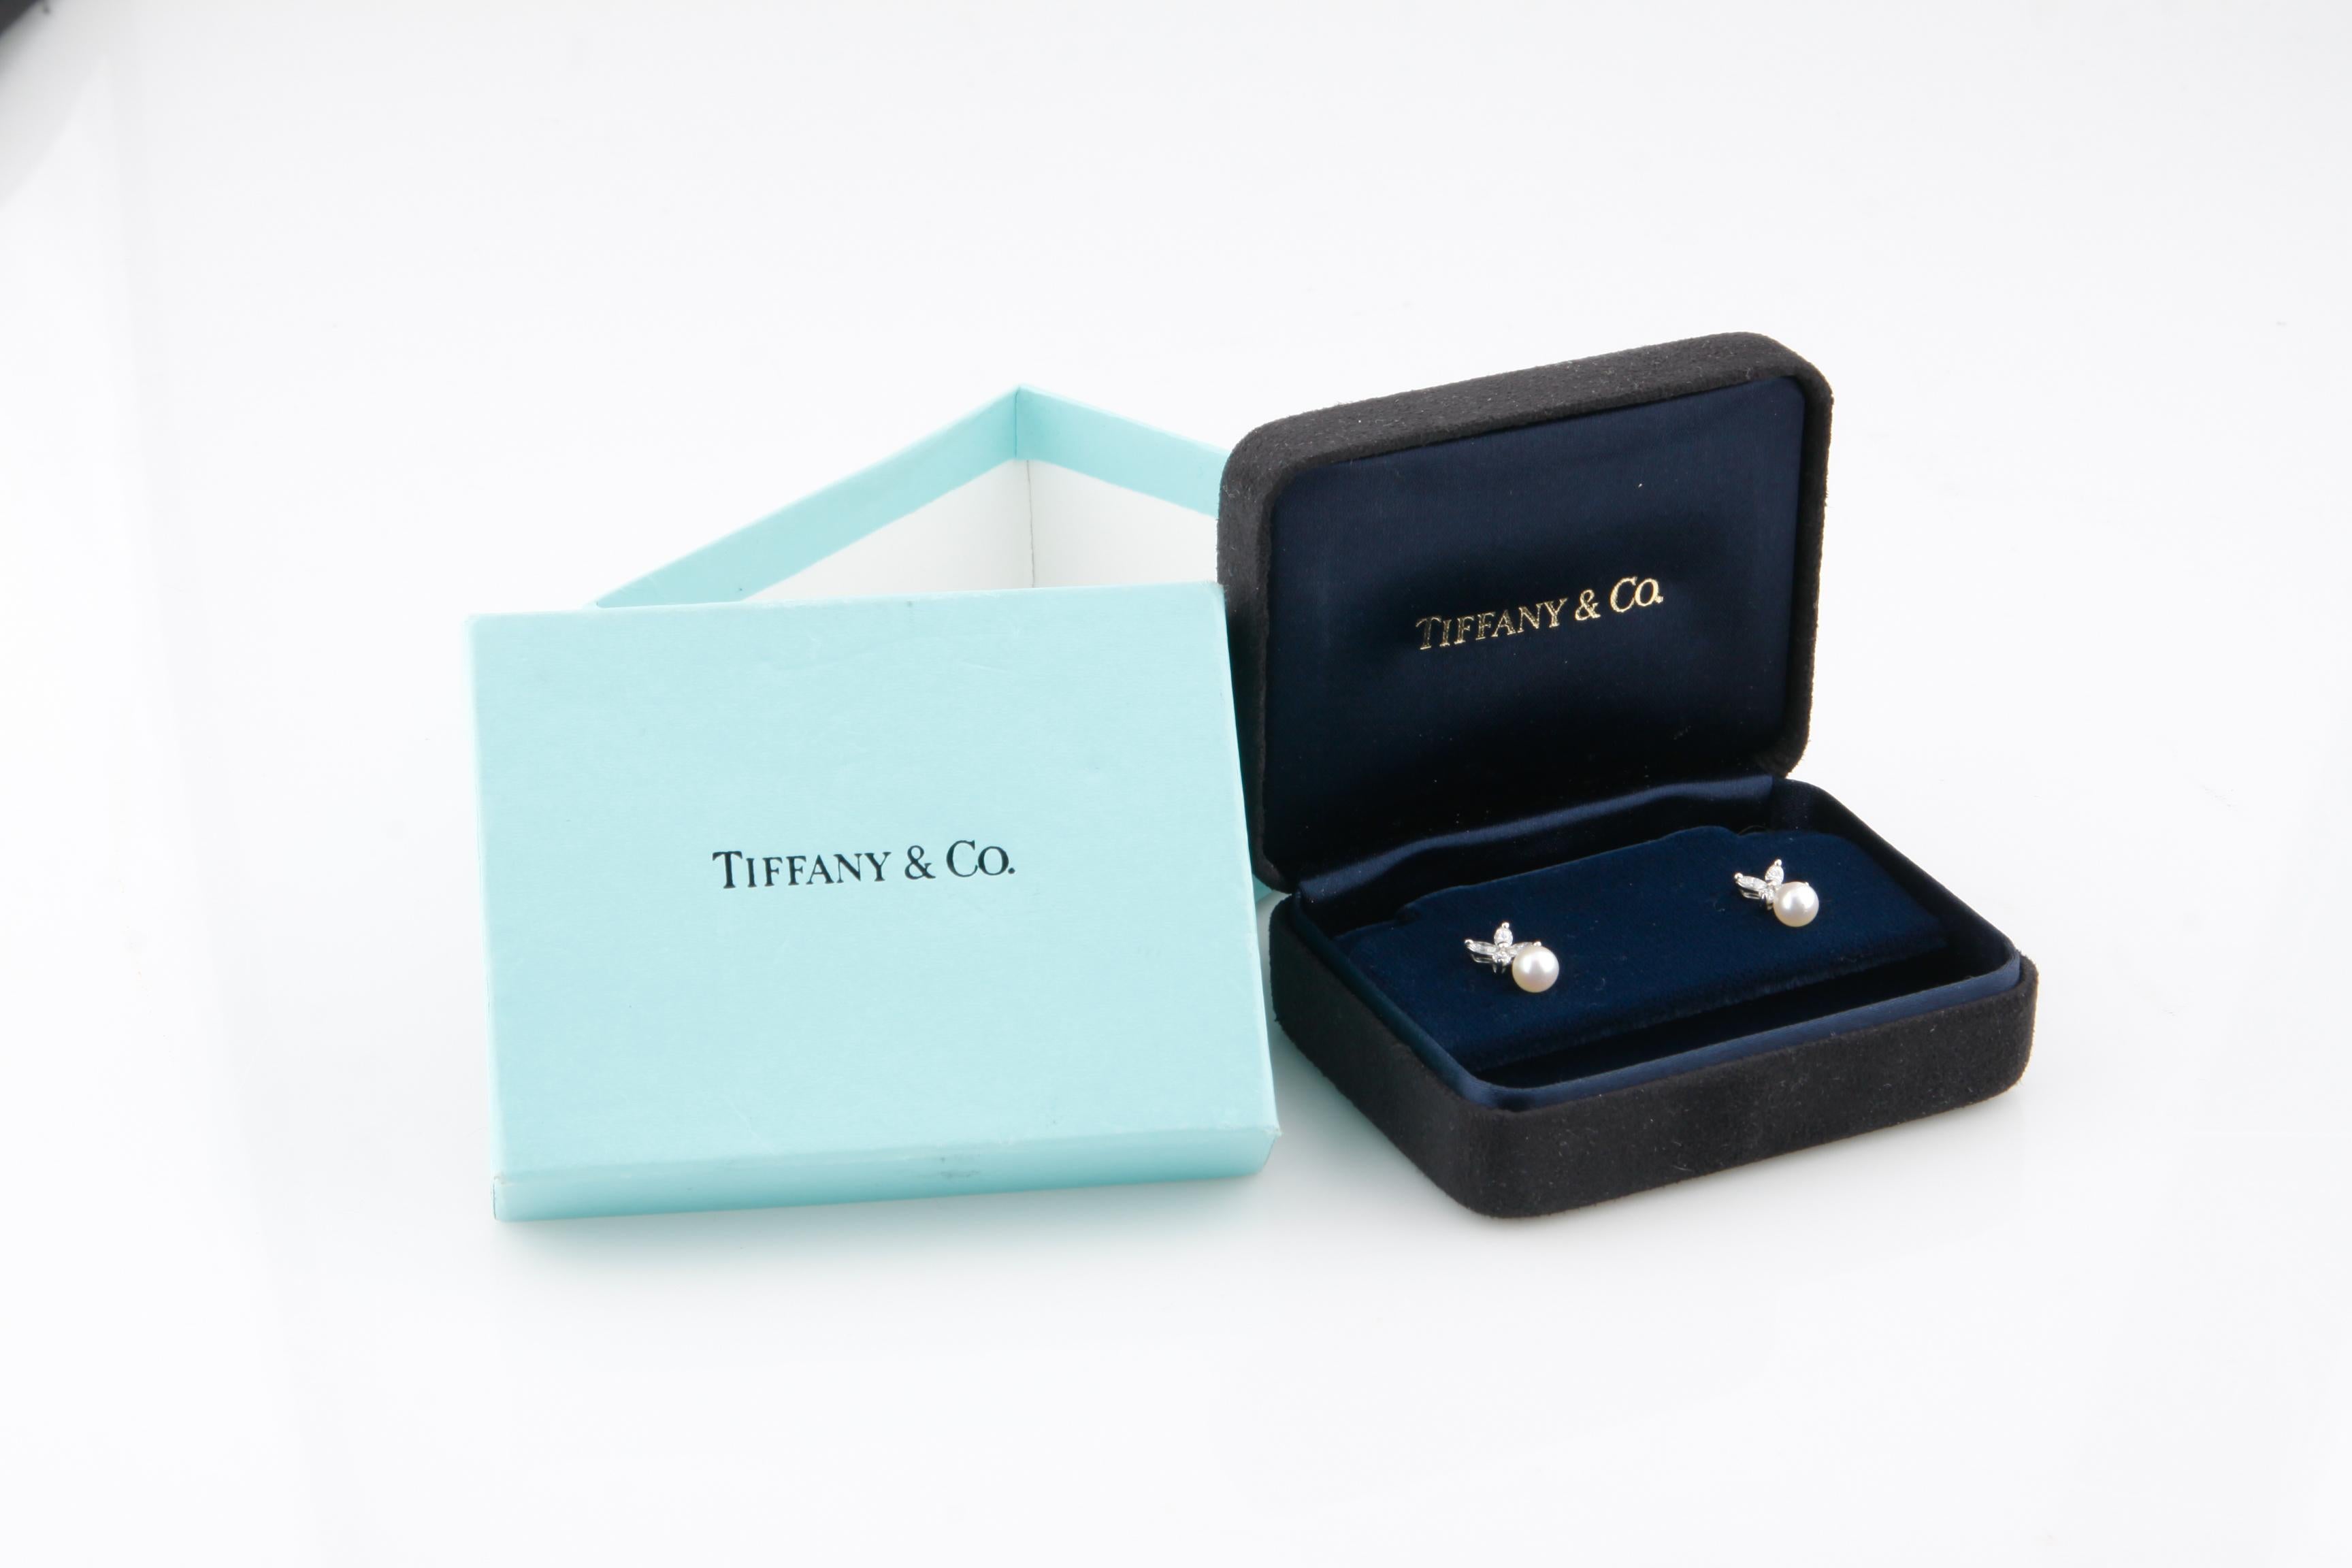 Gorgeous Tiffany & Co. Stud Earrings
Part of the Victoria Collection
Feature 8 Marquise Diamonds in Starburst Configuration
Total Carat Weight = Approximately 0.64 ct
Feature 2 5 mm Pearls
Total Mass = 2.3 grams
Include Original Box and Case